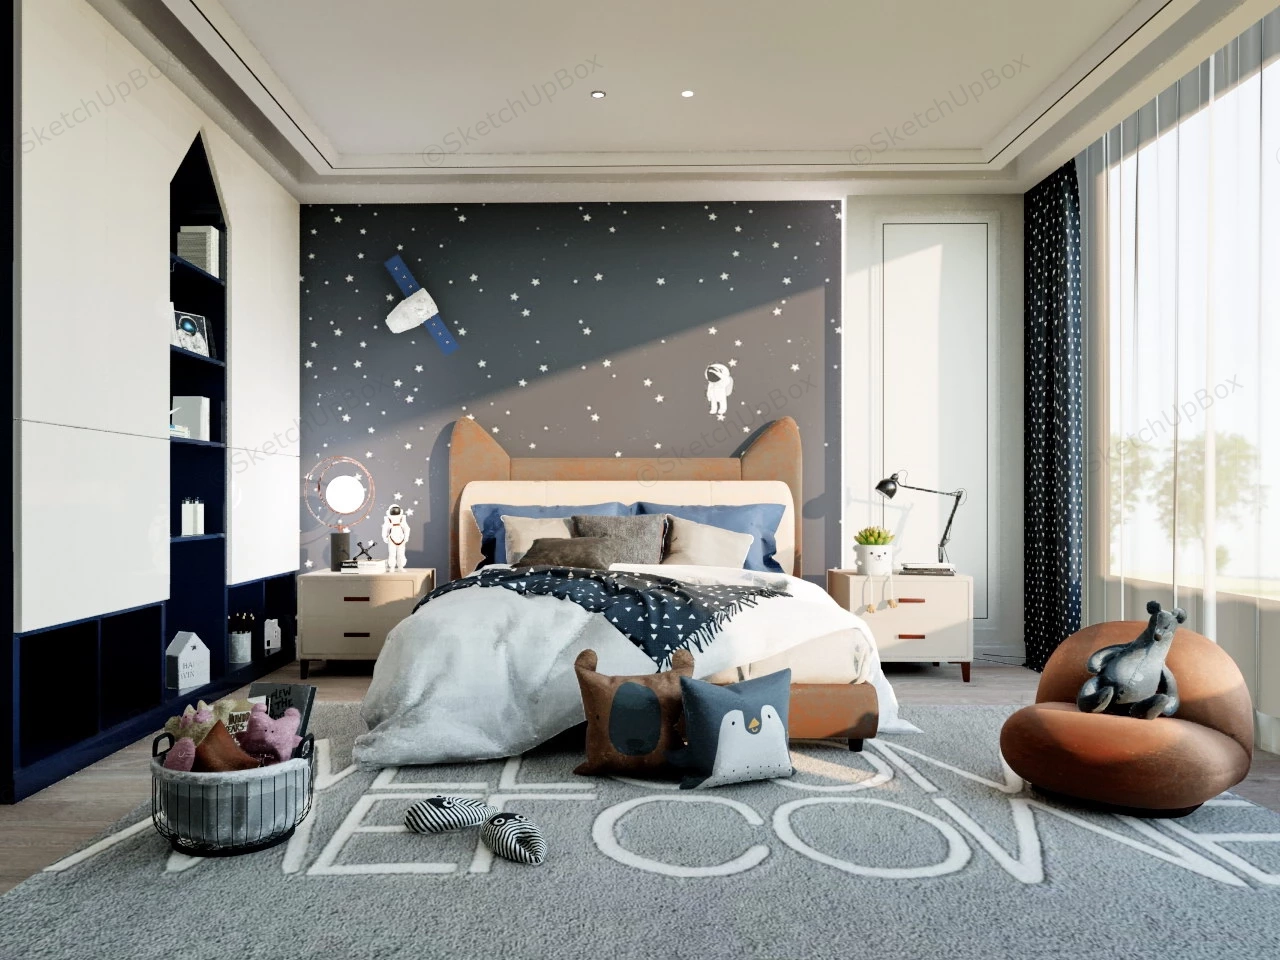 Space Themed Boys Room Design sketchup model preview - SketchupBox